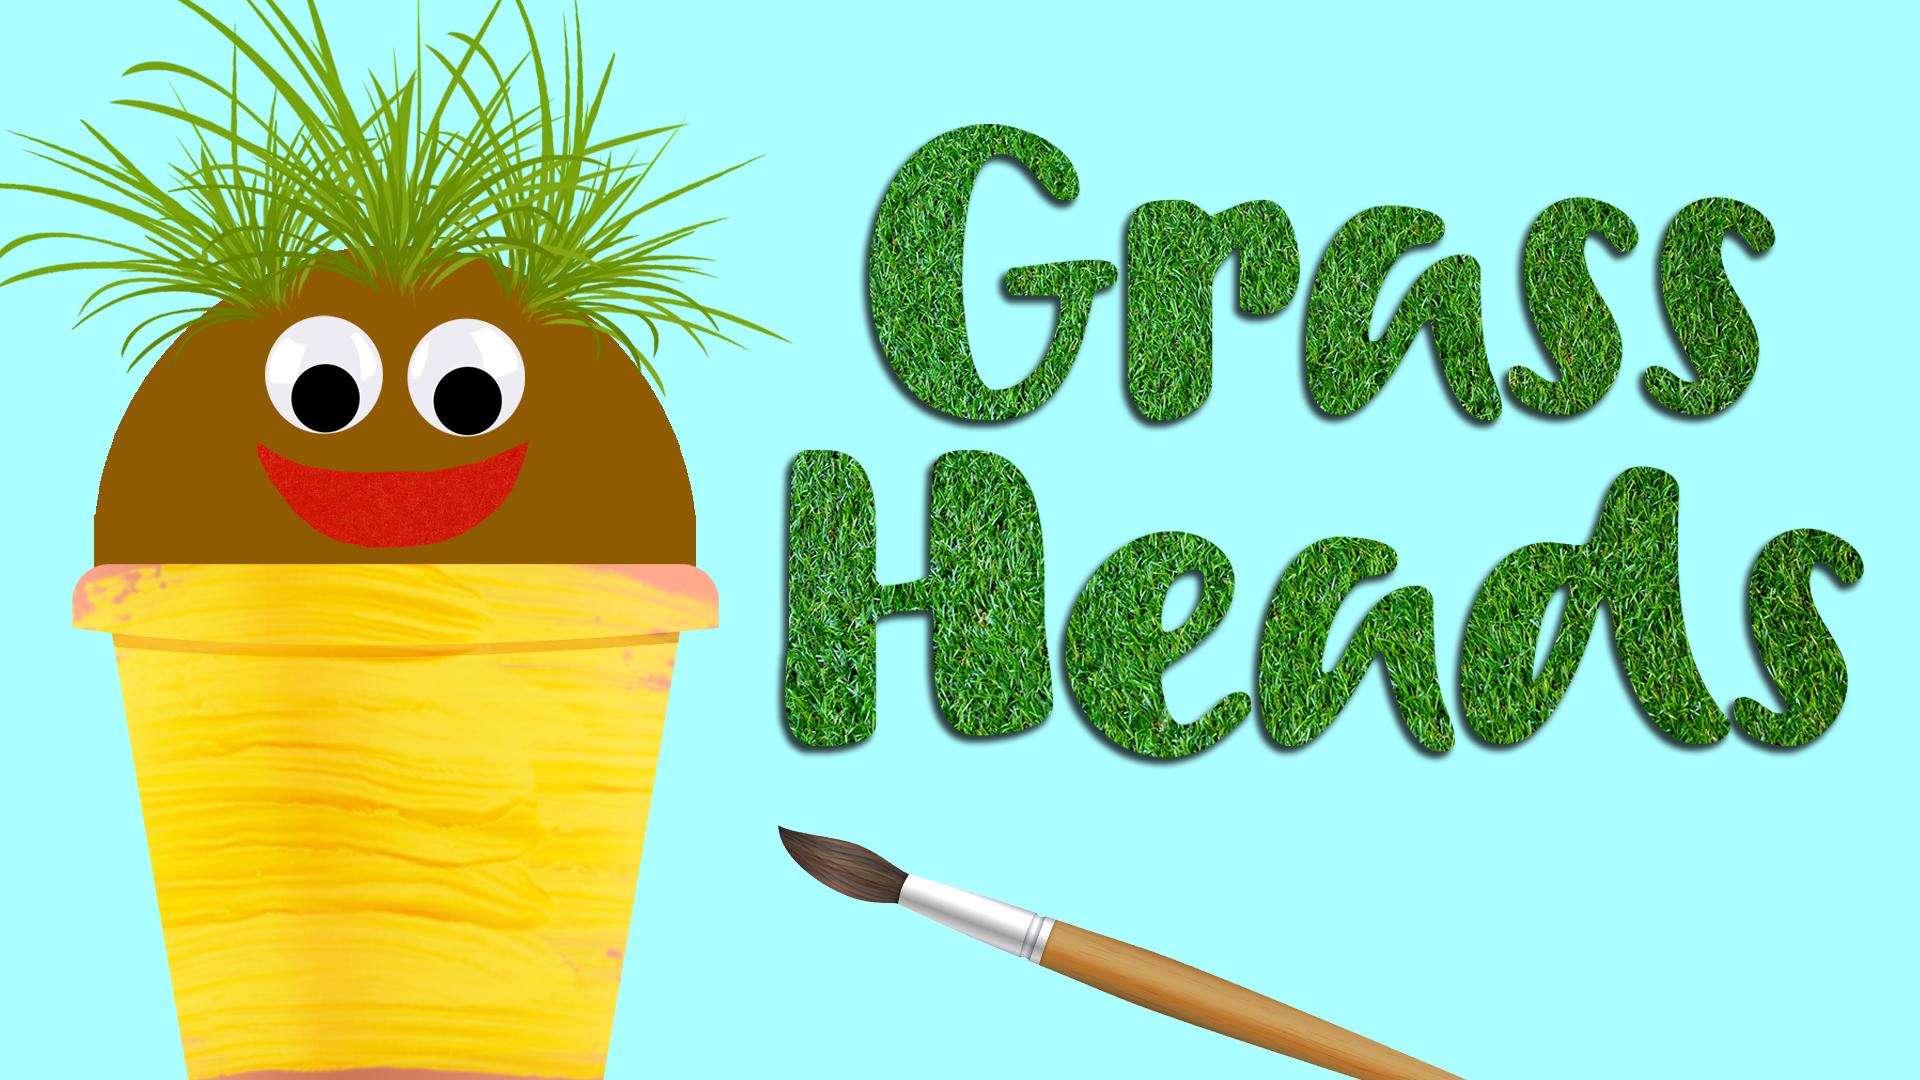 Image reads "Grass Heads" against a blue background. A pot with compost and grass growing out of the top is to the left of the title. The grass head pot has googly eyes and a felt mouth. A paintbrush is under the title.